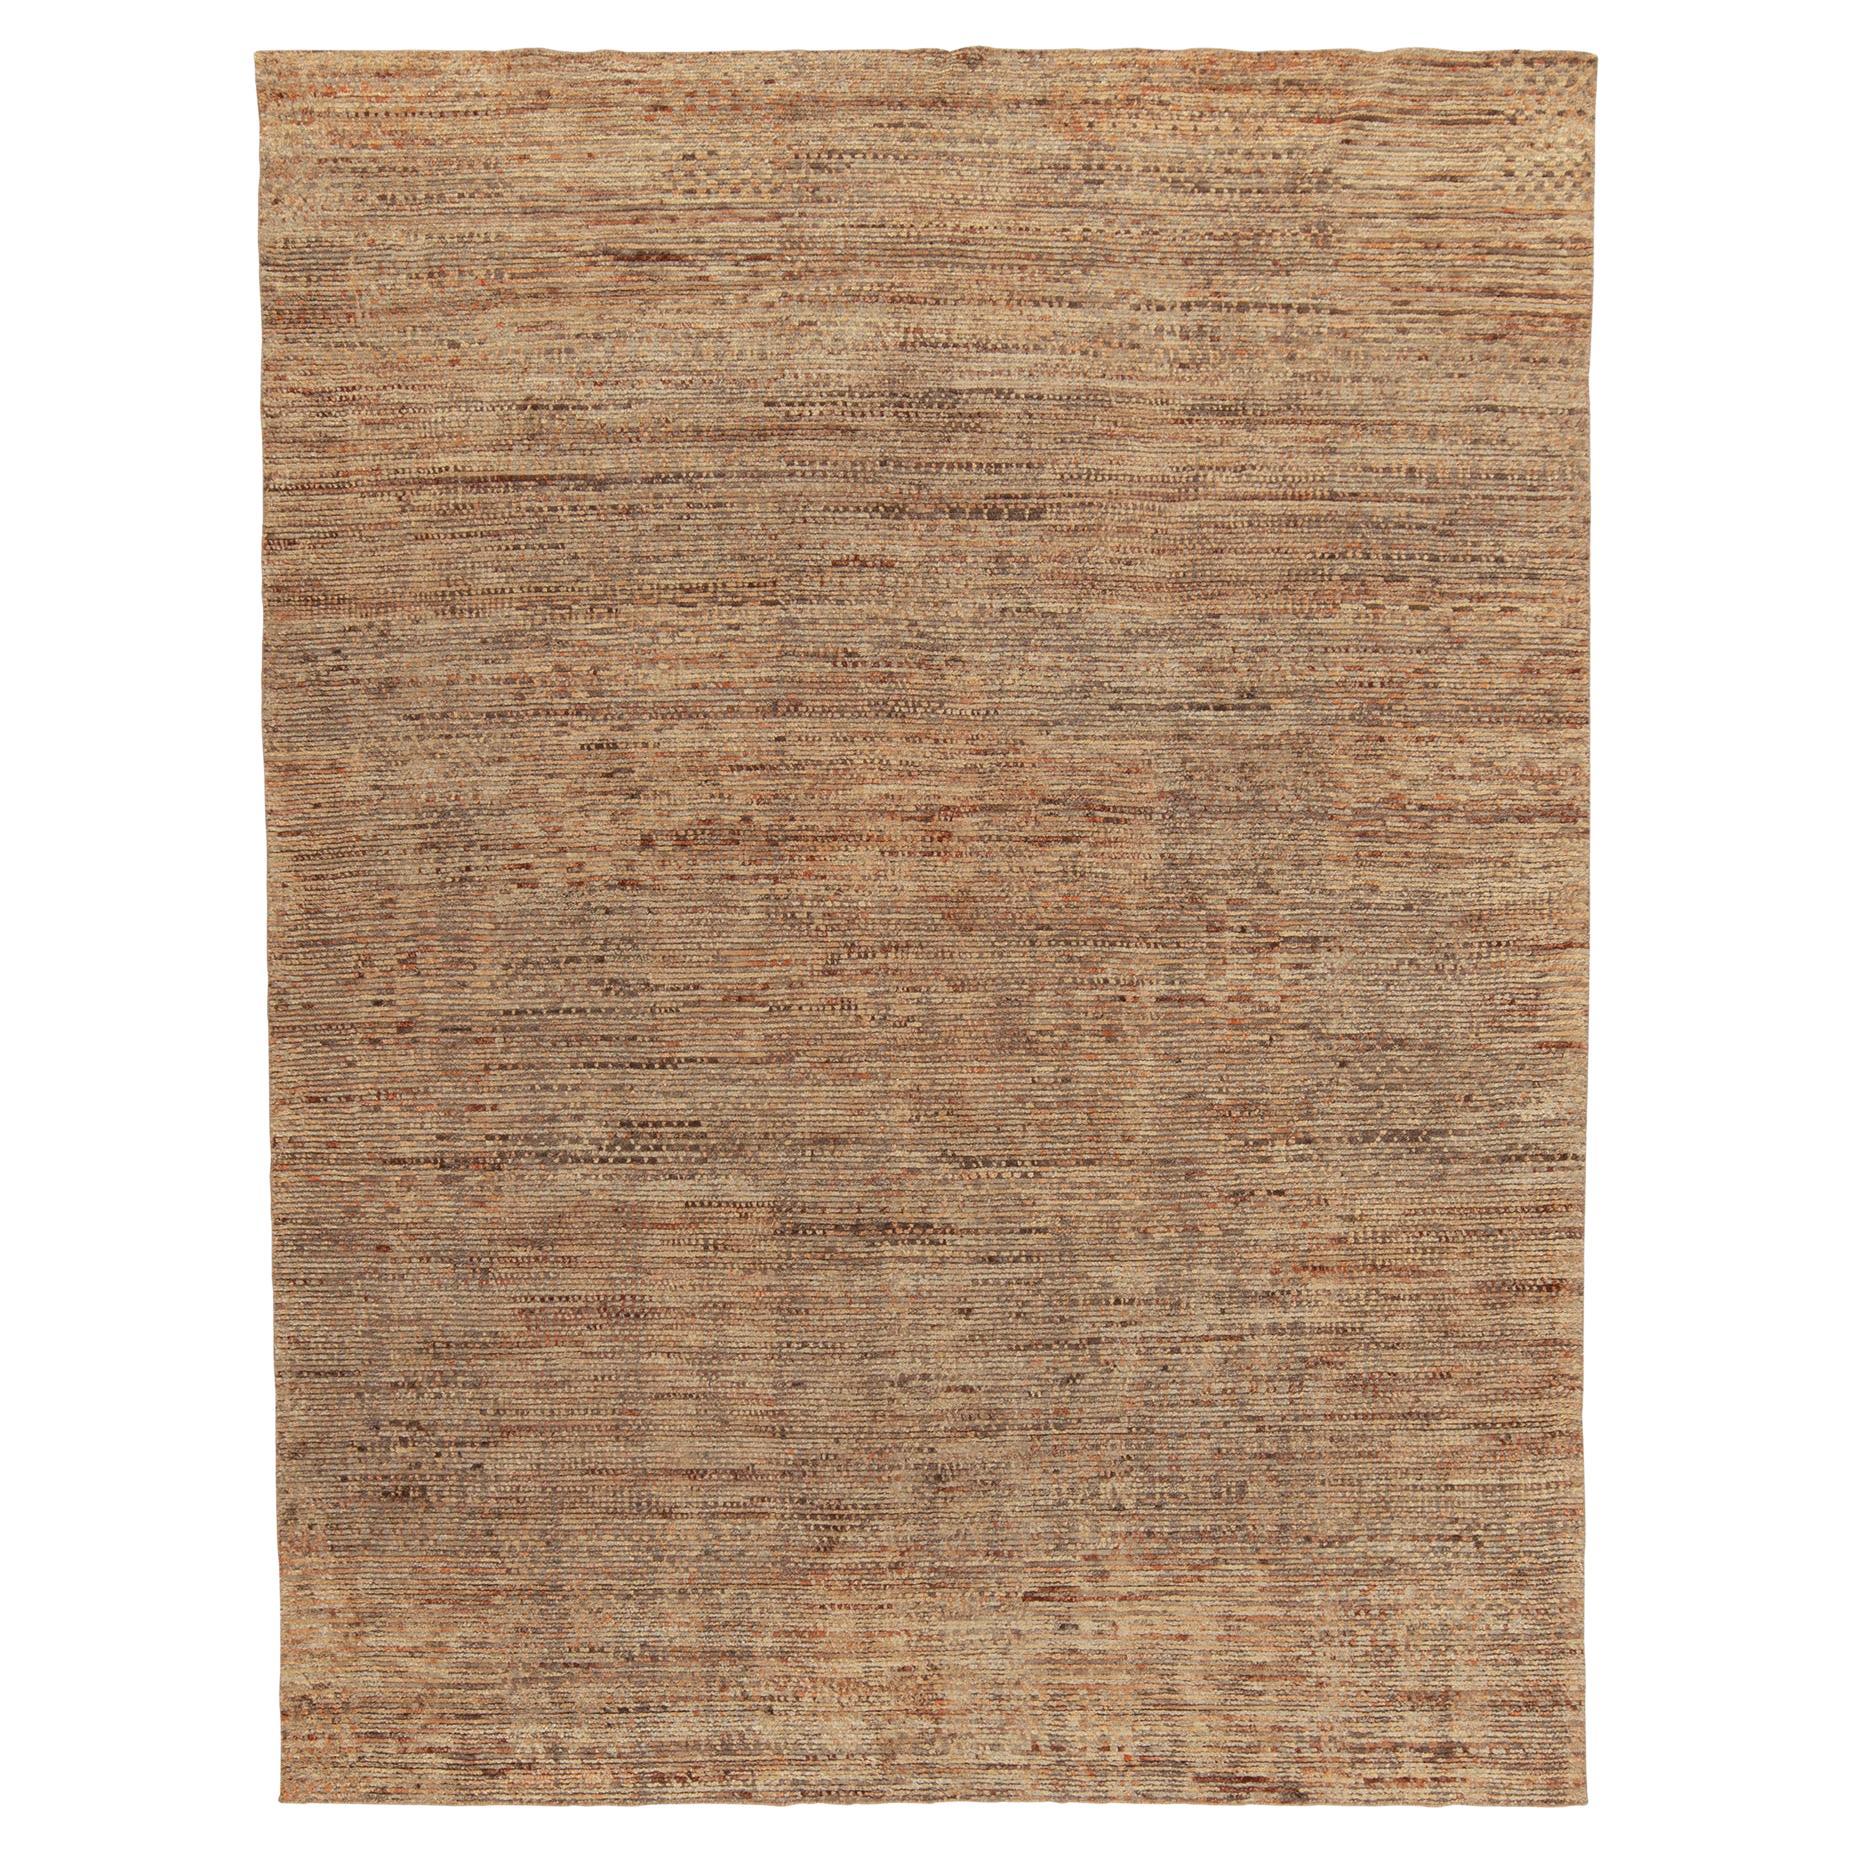 From Rug & Kilim’s Modern selections, an 8x10 hand-knotted piece exemplifying a bold new language in contemporary rugs. The nurtured vision embraces warm striations in orange with subtle kisses of red accenting the richness of beige-brown with a